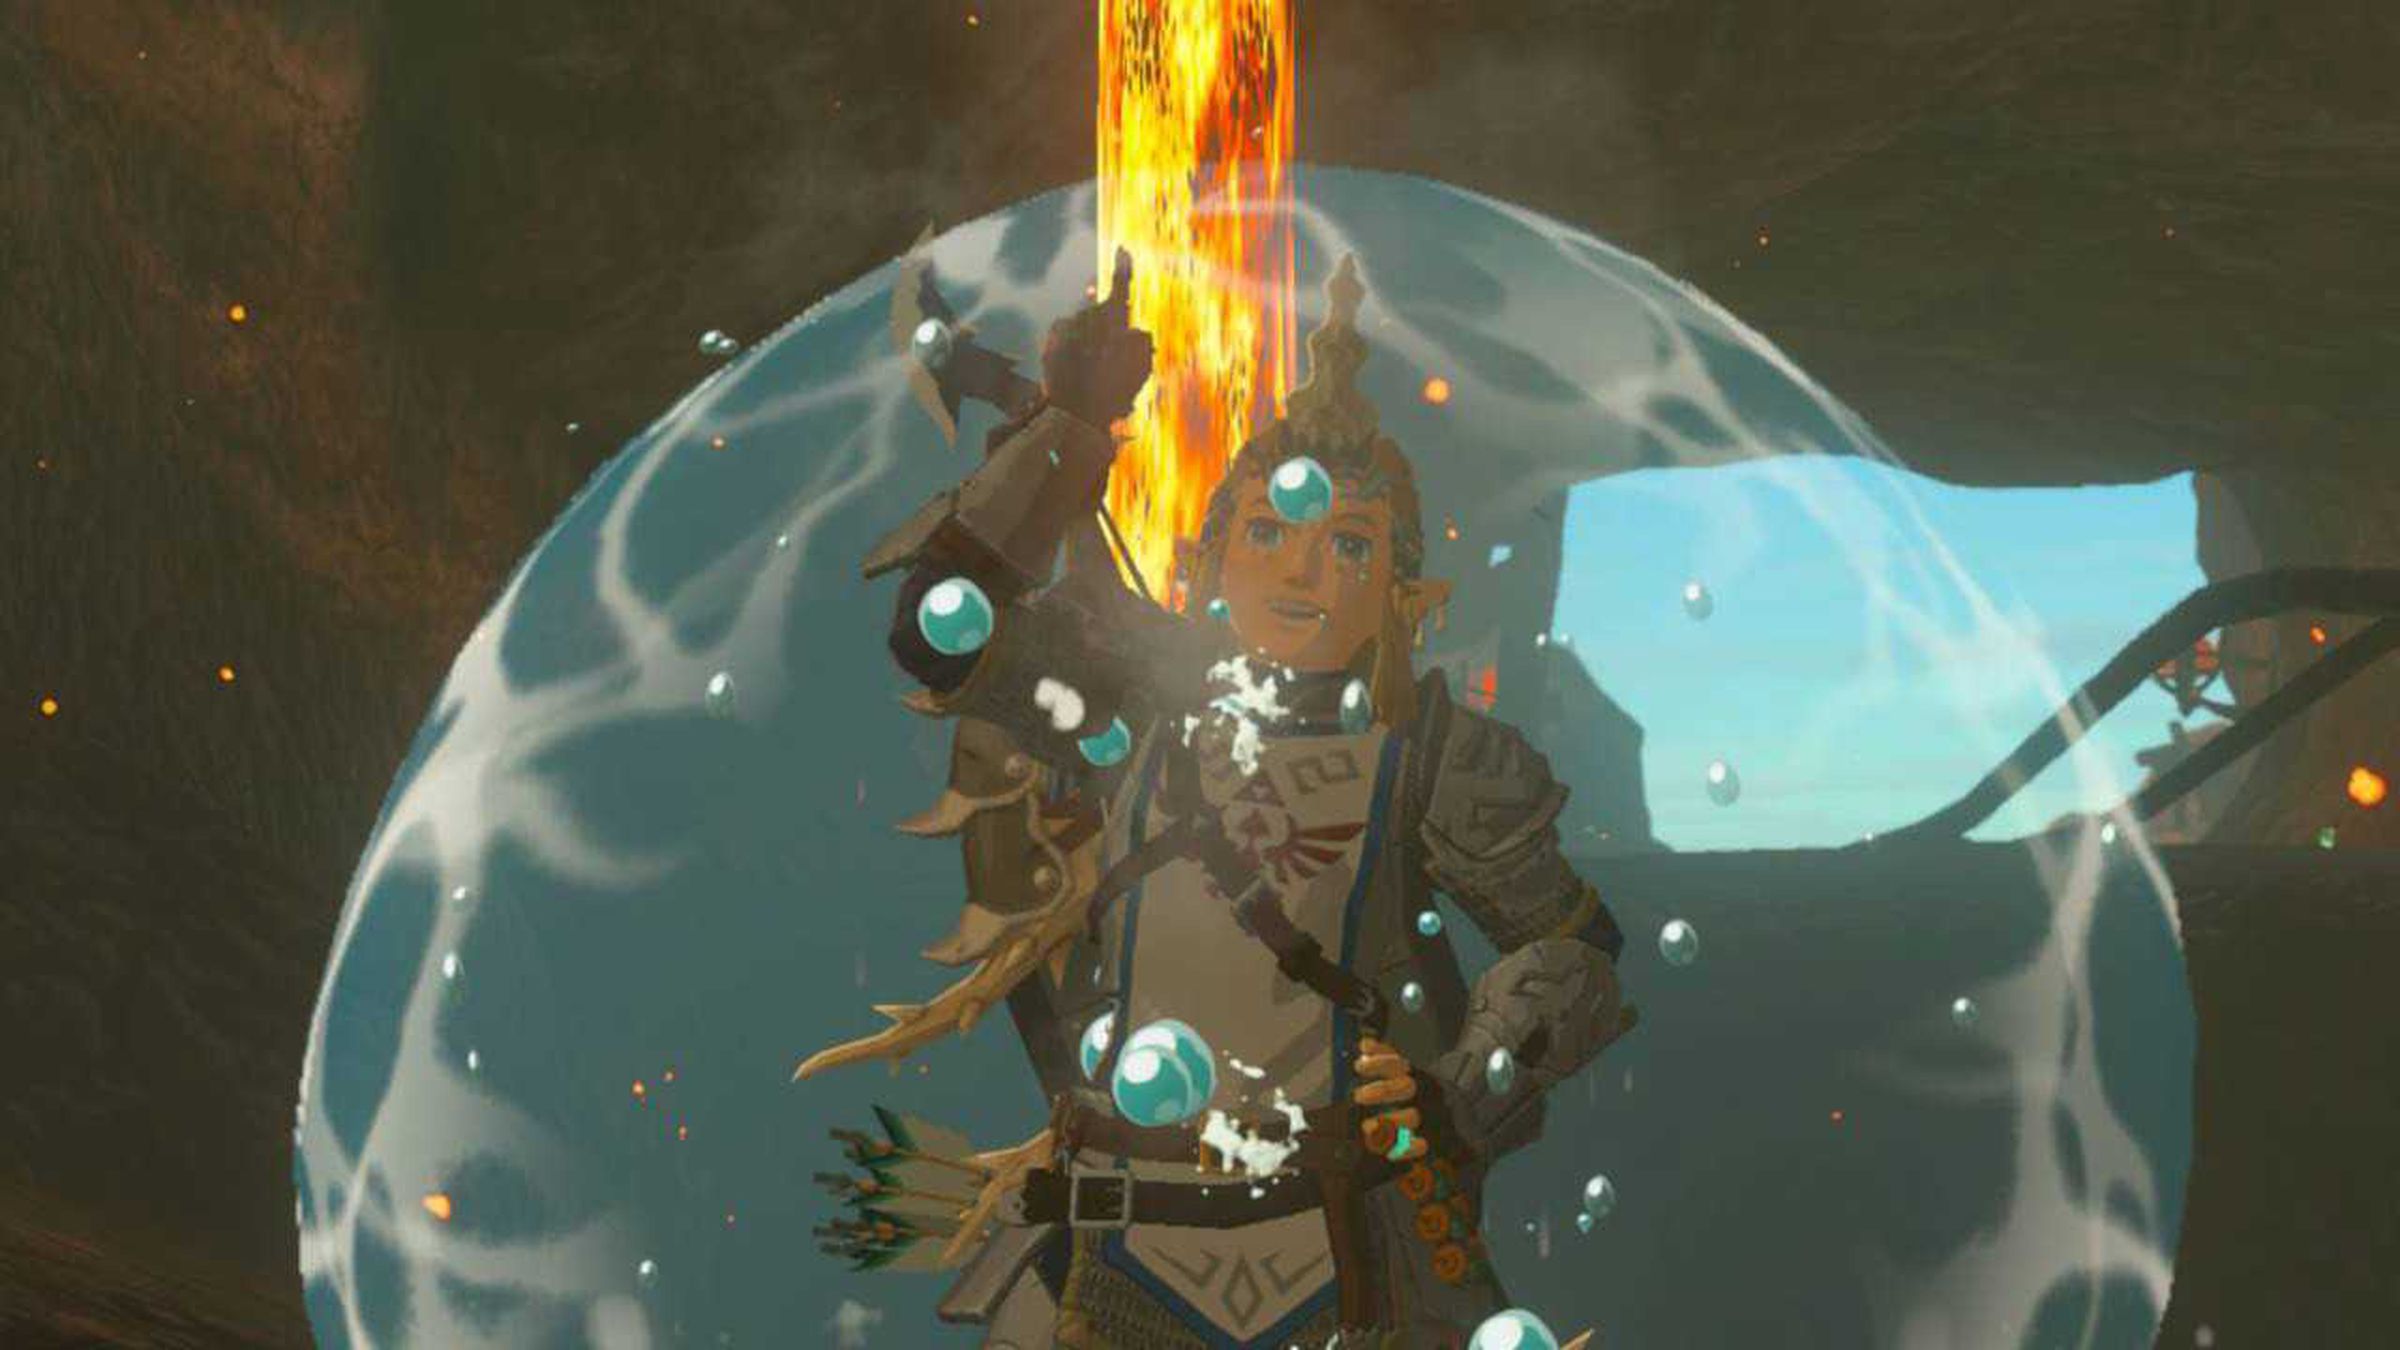 Screenshot from The Legend of Zelda: Tears of the Kingdom featuring the hero Link encased in a protective water bubble in a superheated underground lava cave.